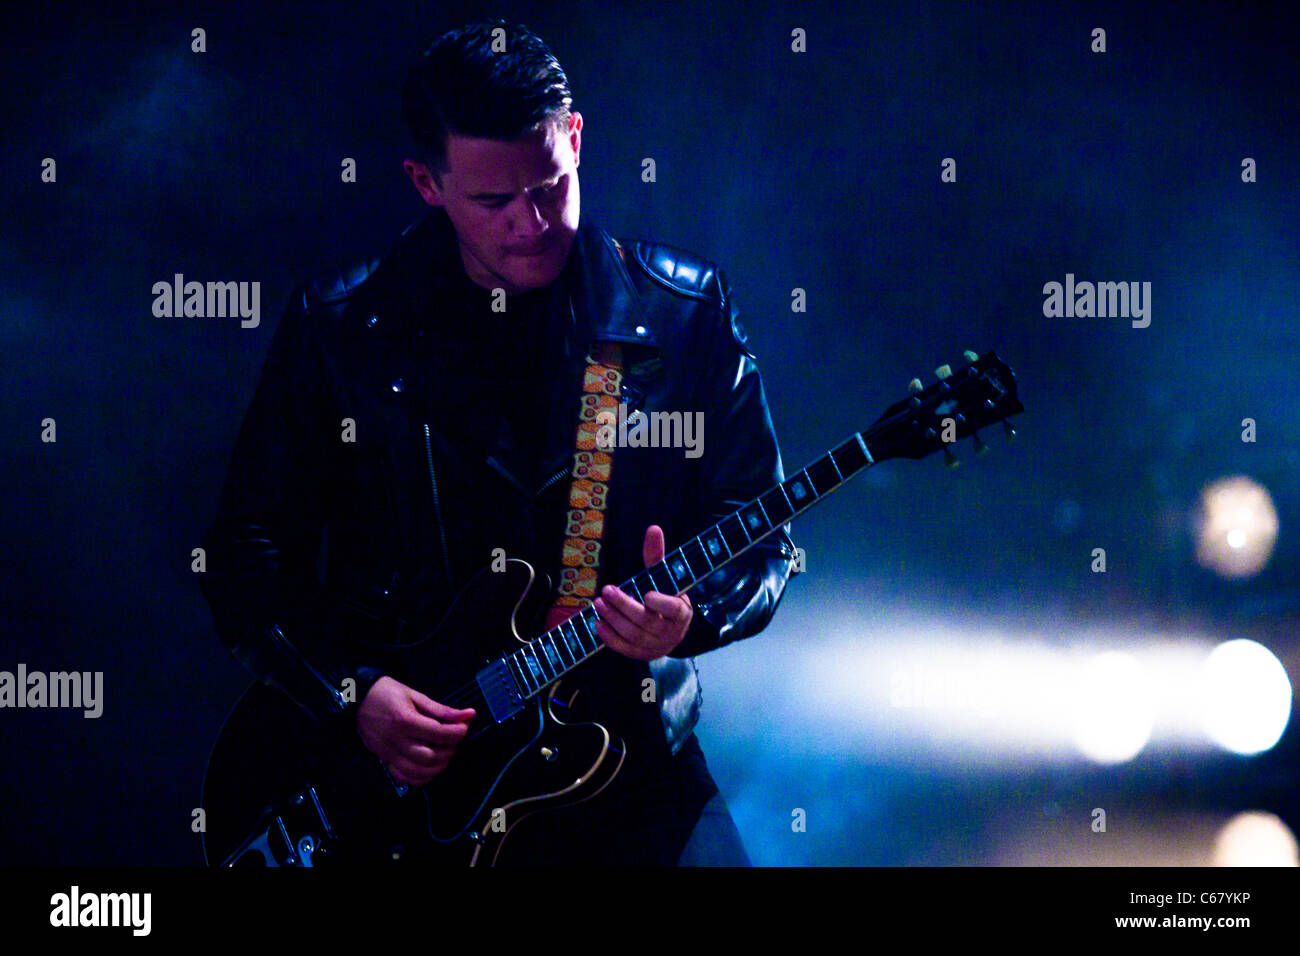 Jamie Cook from Artic Monkeys performing live on stage at Benicassim FIB Festival - July 2011 Stock Photo